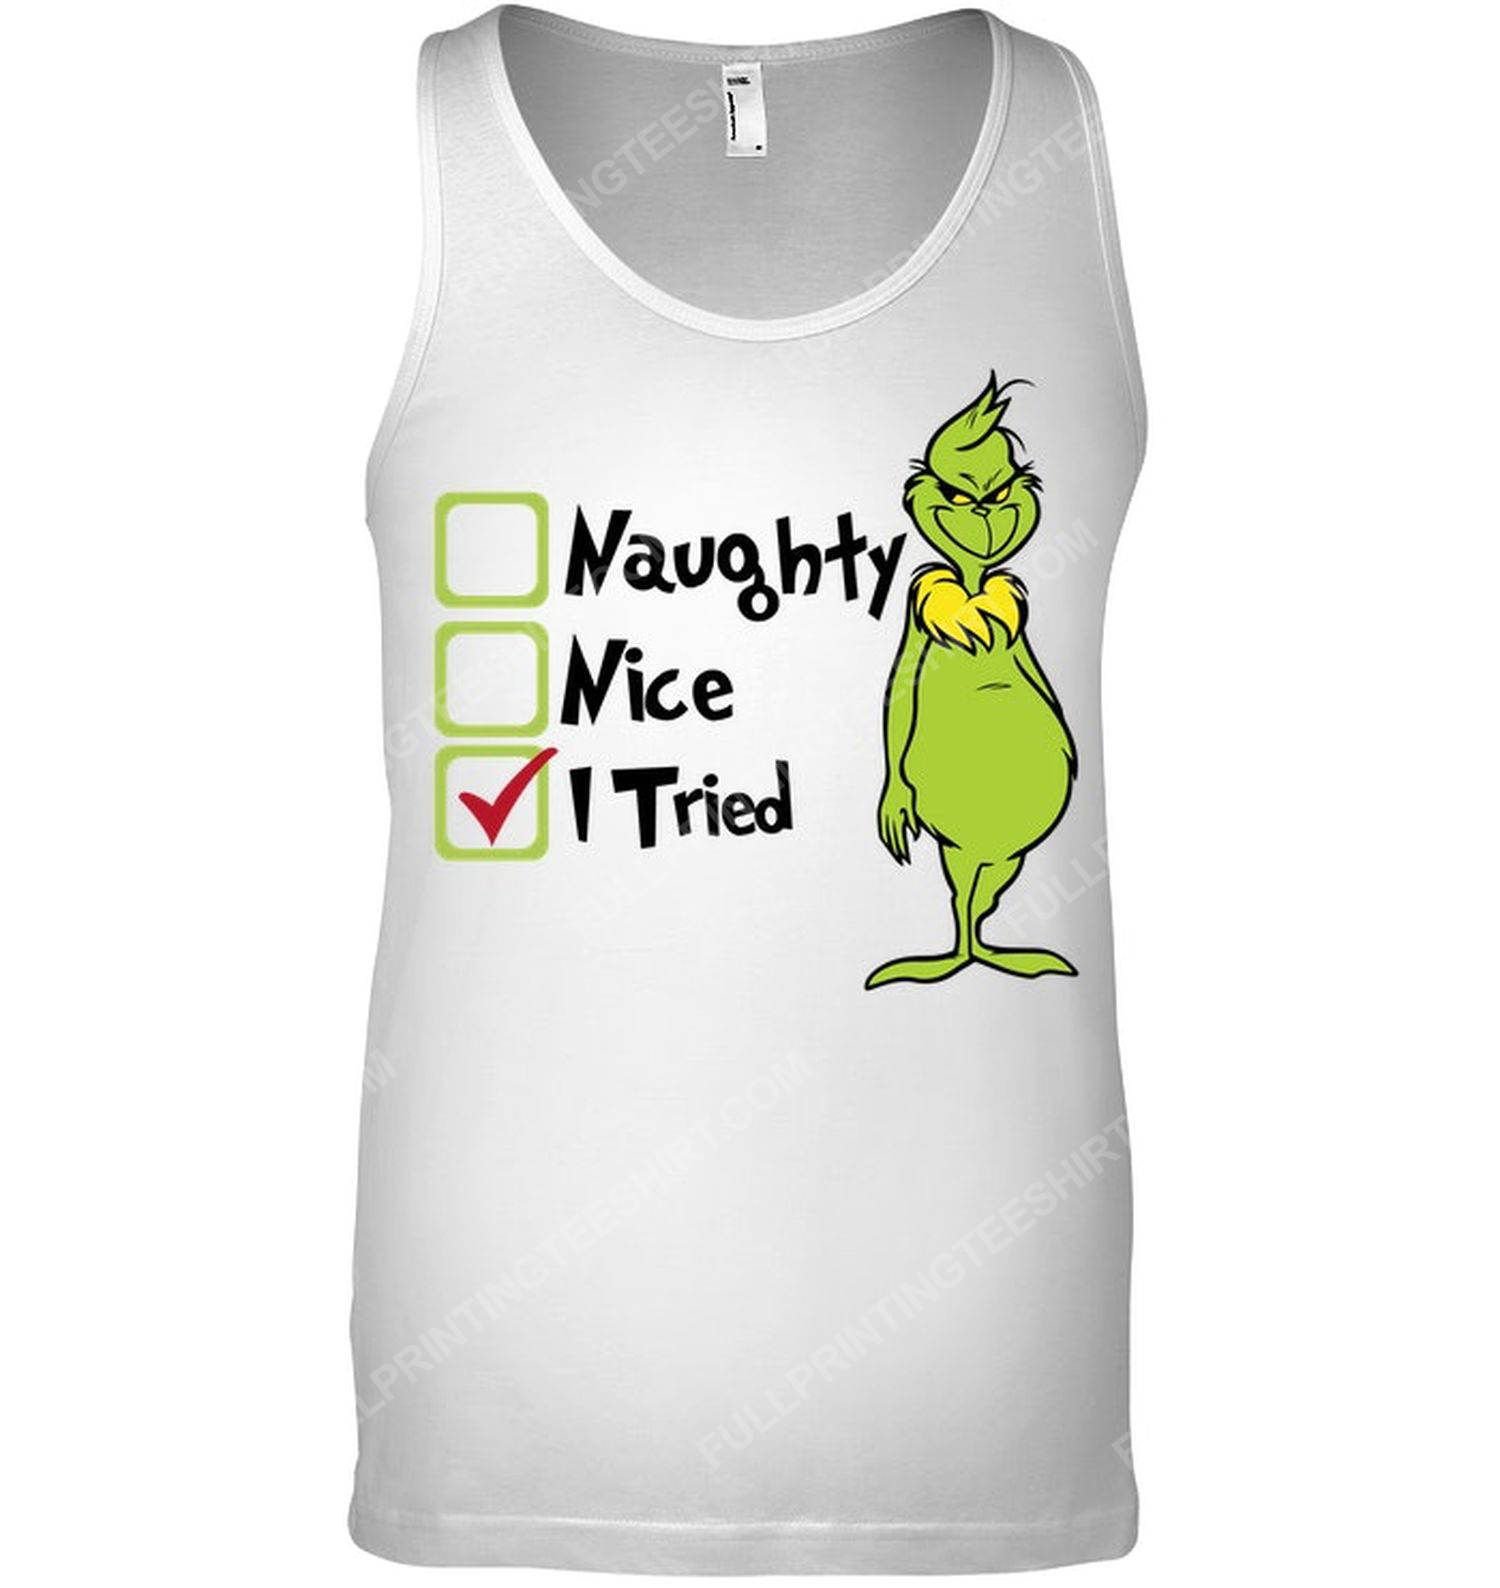 Christmas time the grinch naughty nice i tried tank top